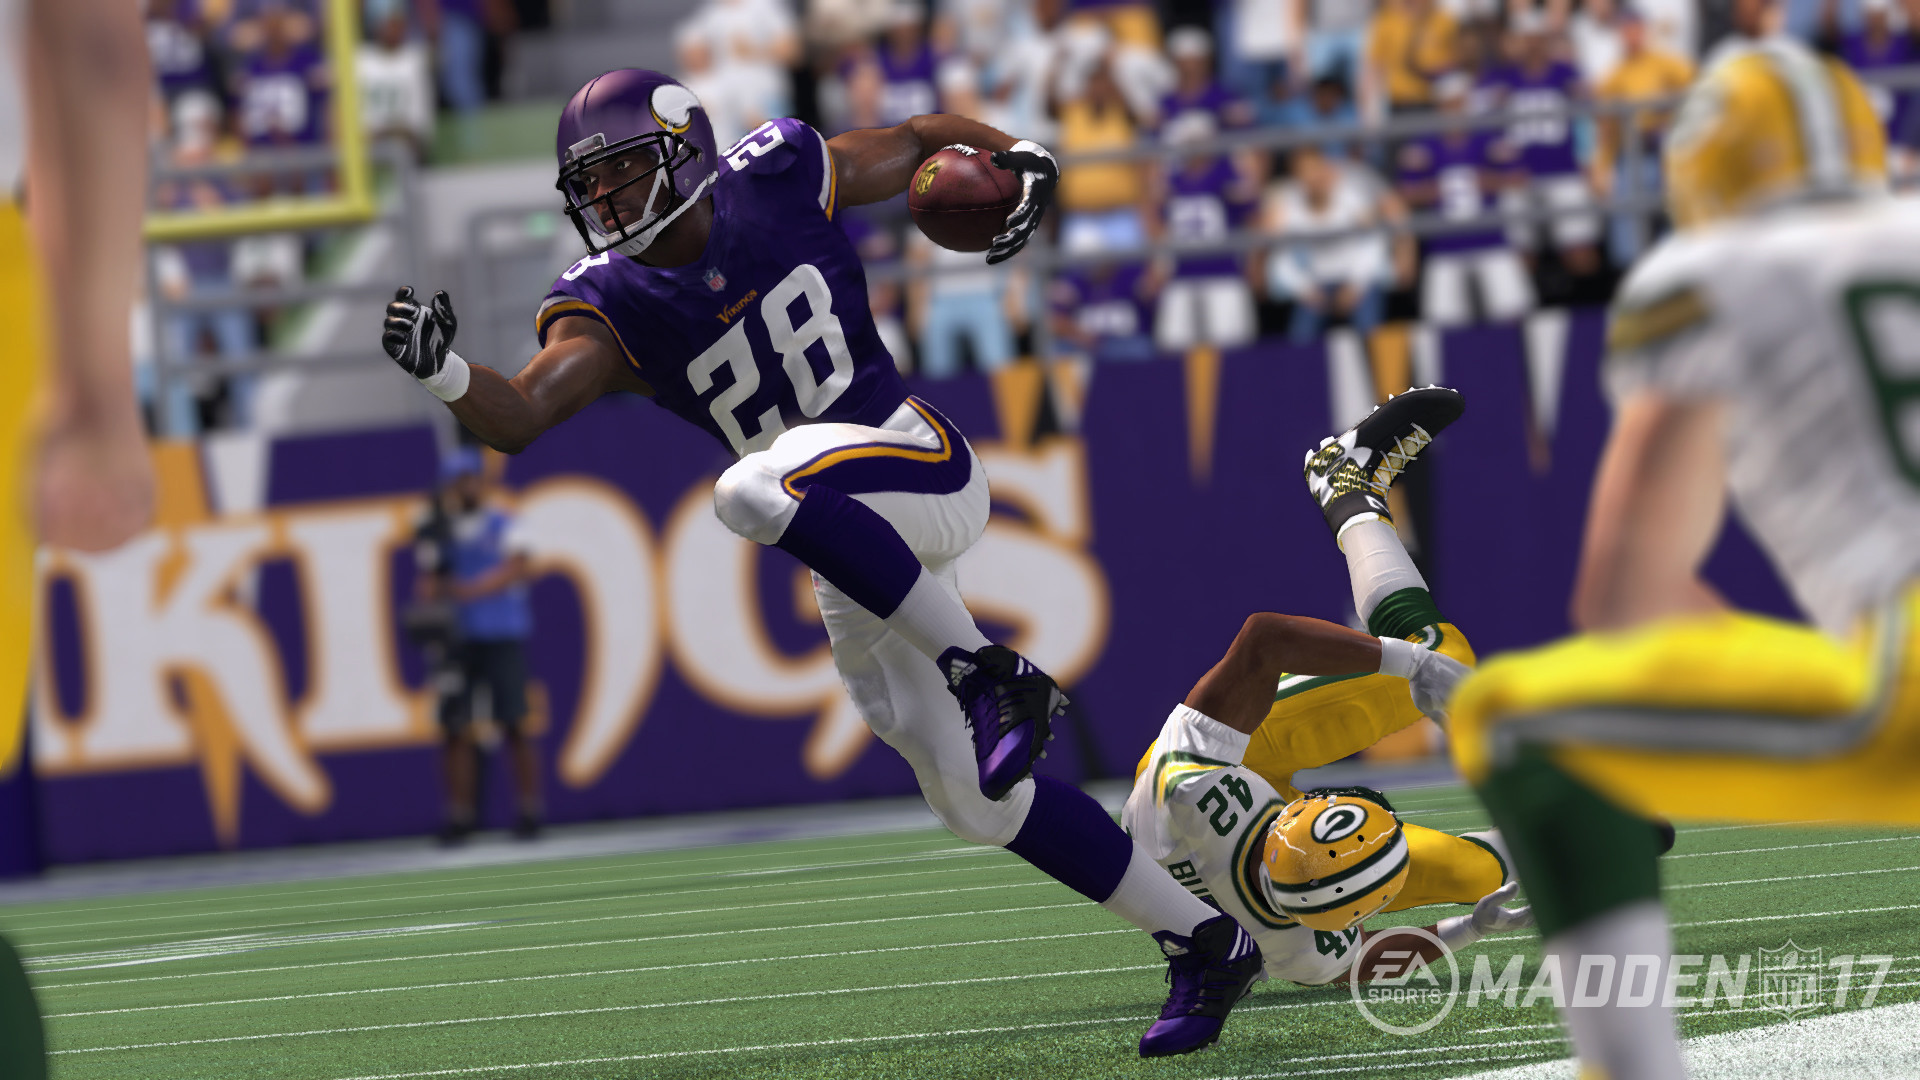 1920x1080 Madden NFL 17 top RB ratings: Le'Veon Bell edges Adrian Peterson at top